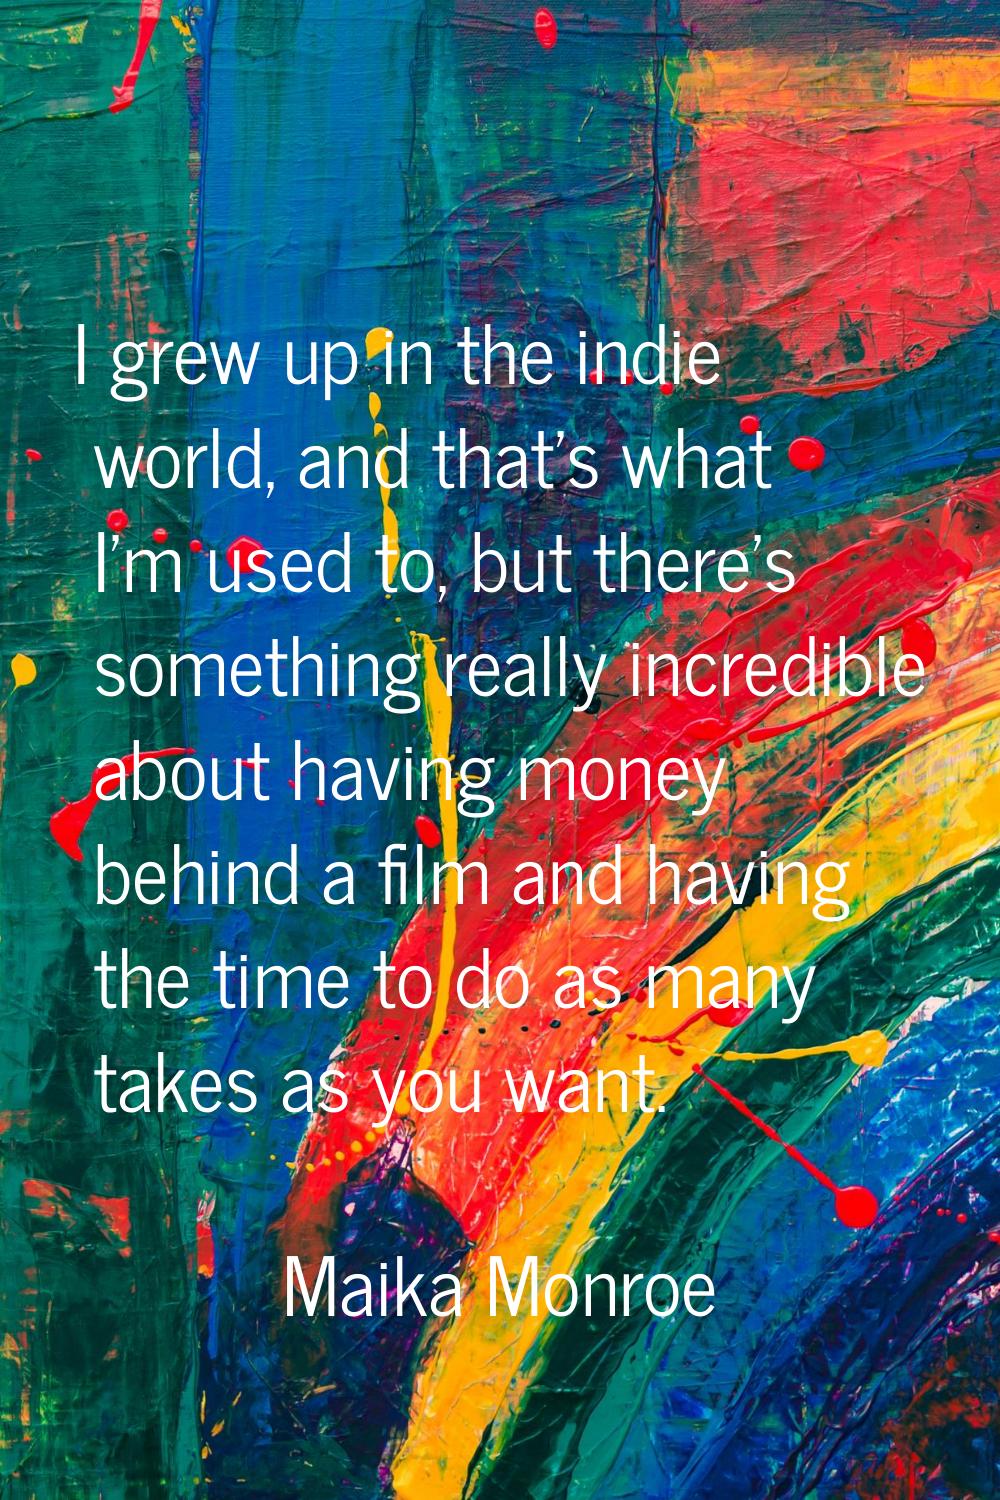 I grew up in the indie world, and that's what I'm used to, but there's something really incredible 